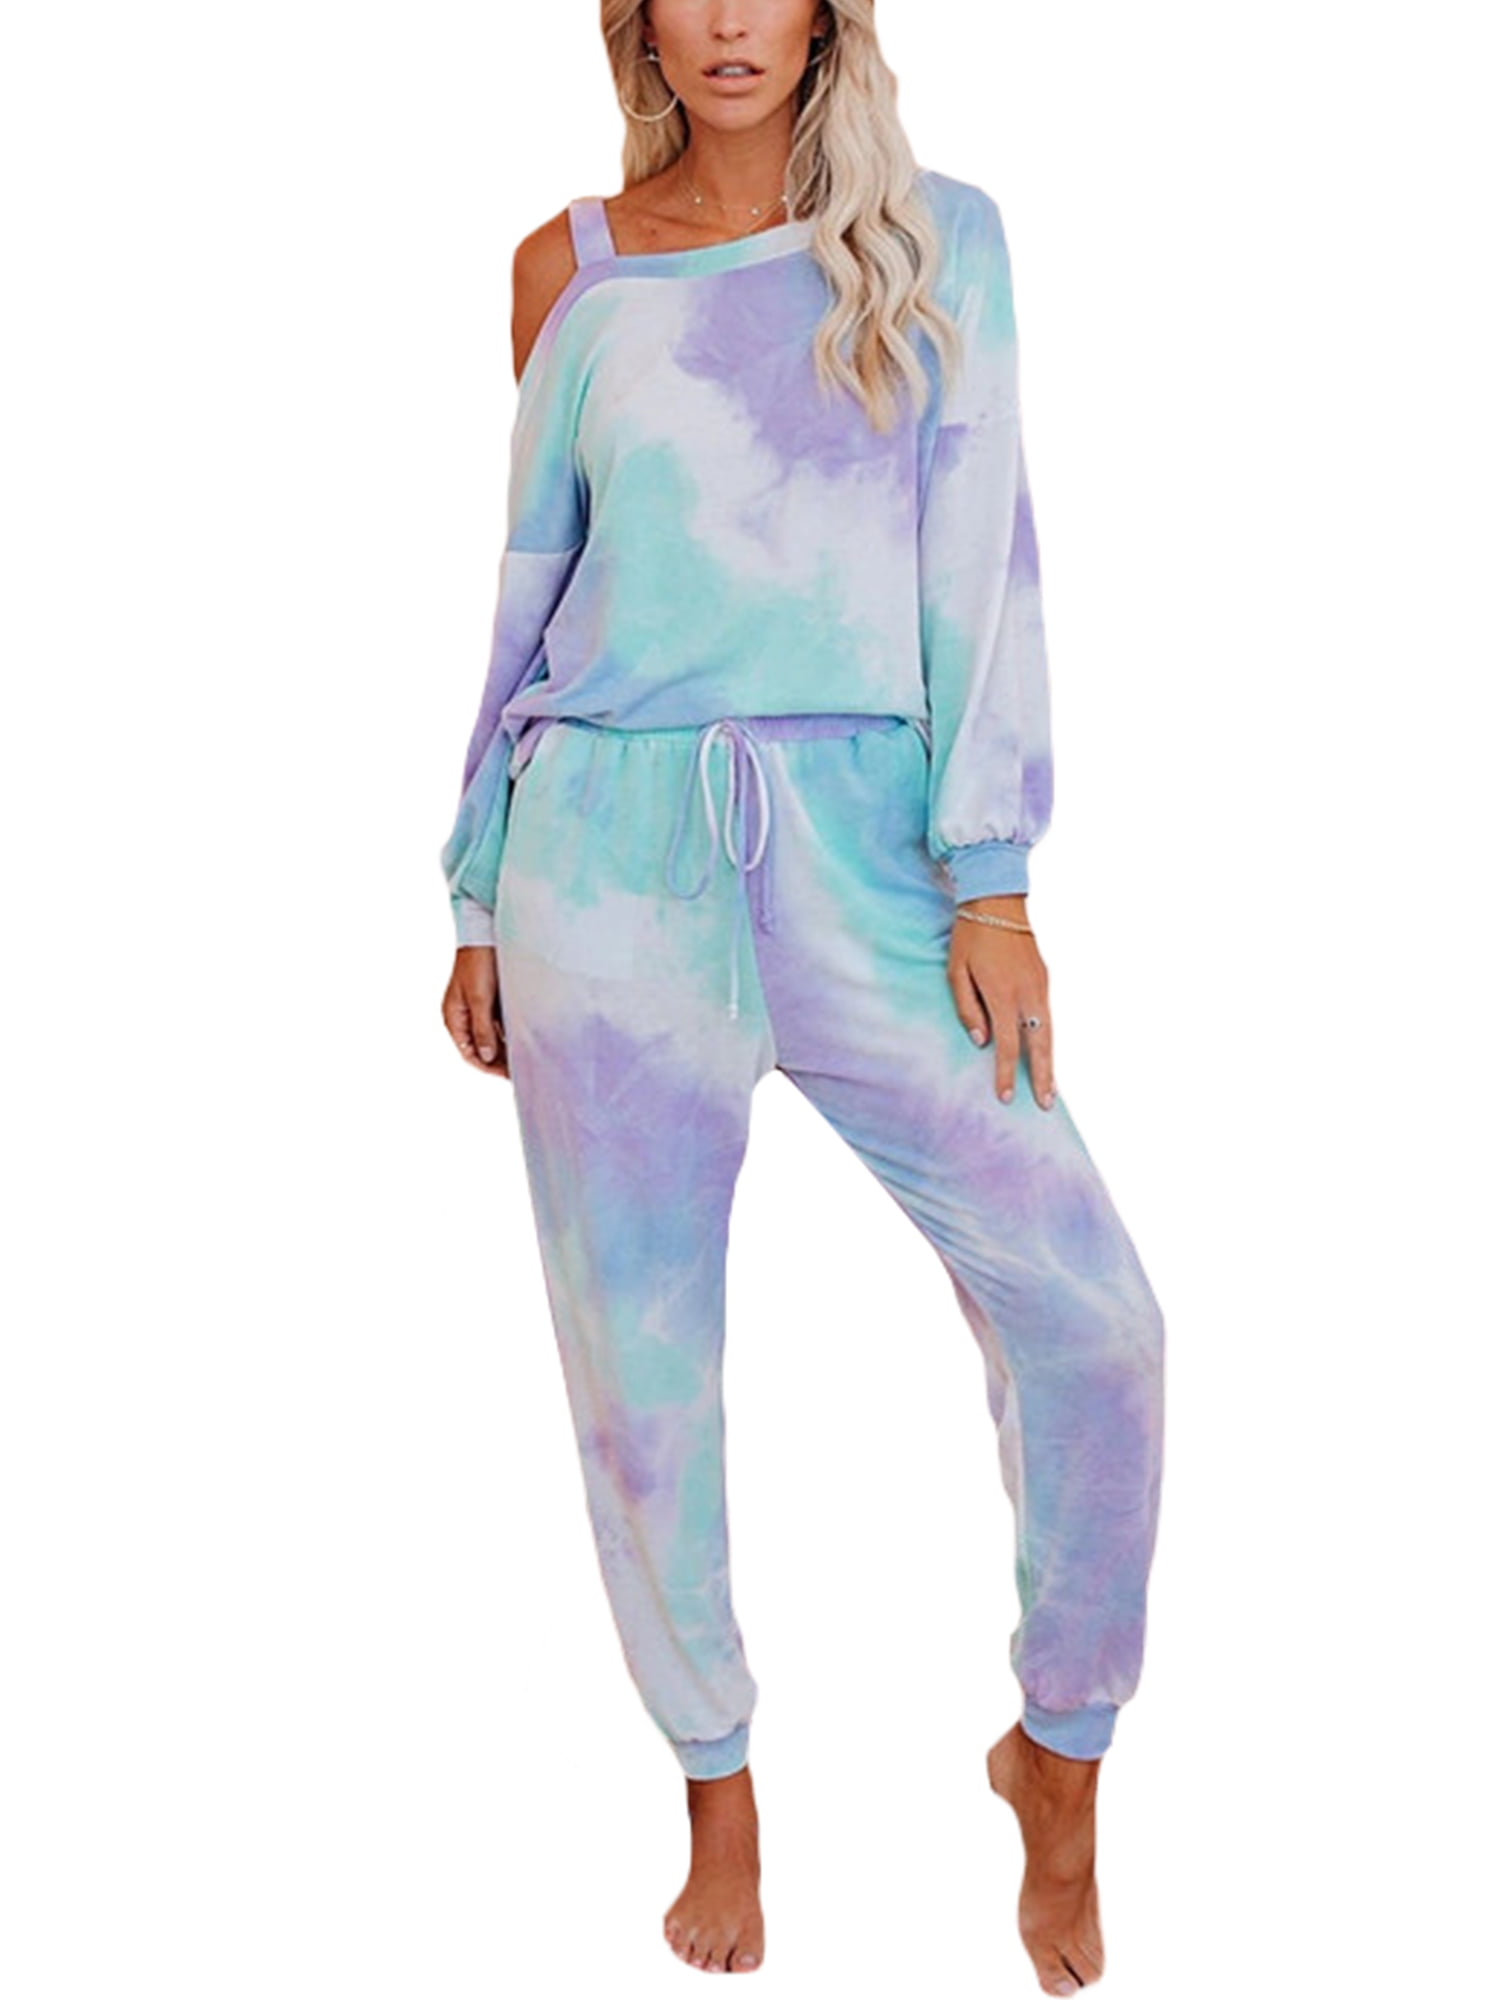 Sweatpants Lounge Sets Tie Dye Loose Fashion Outfit Details about   Womens Long Sleeve T-Shirt